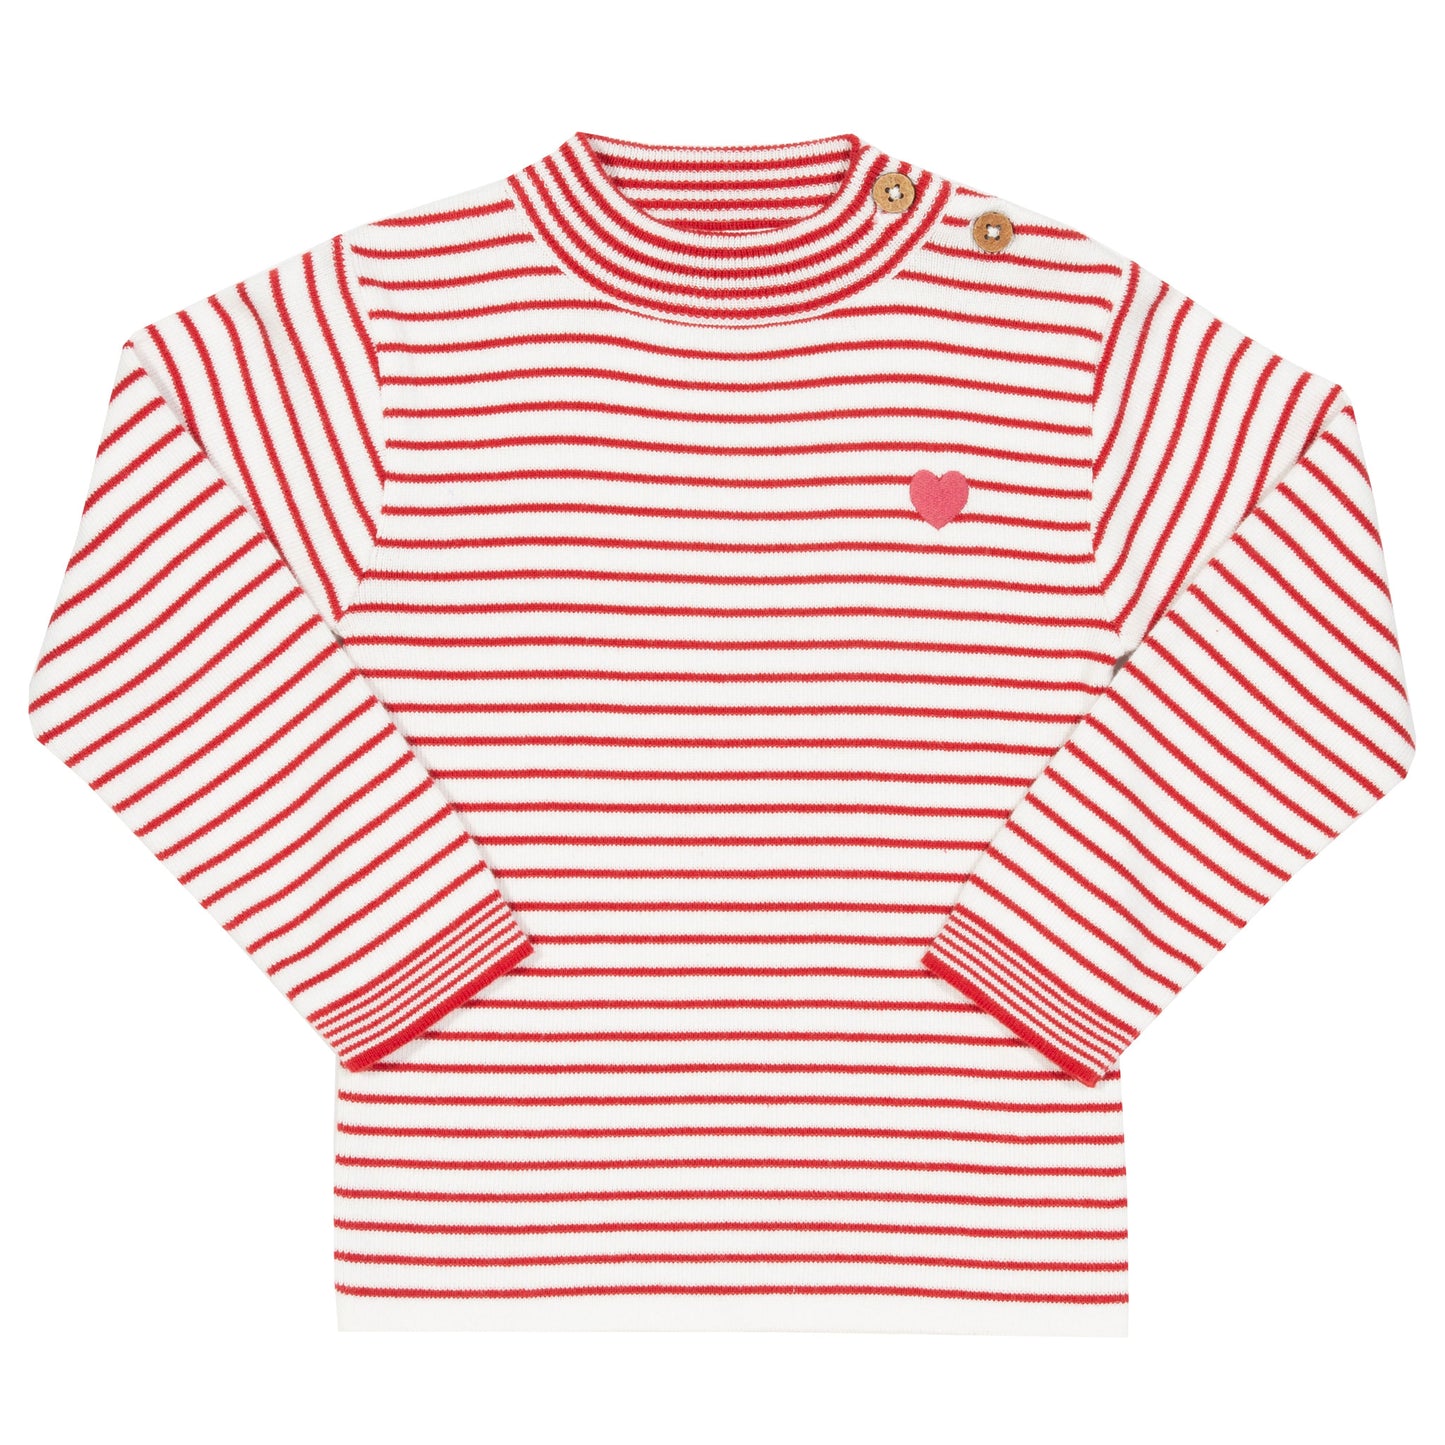 Red stripy jumper with pink heart